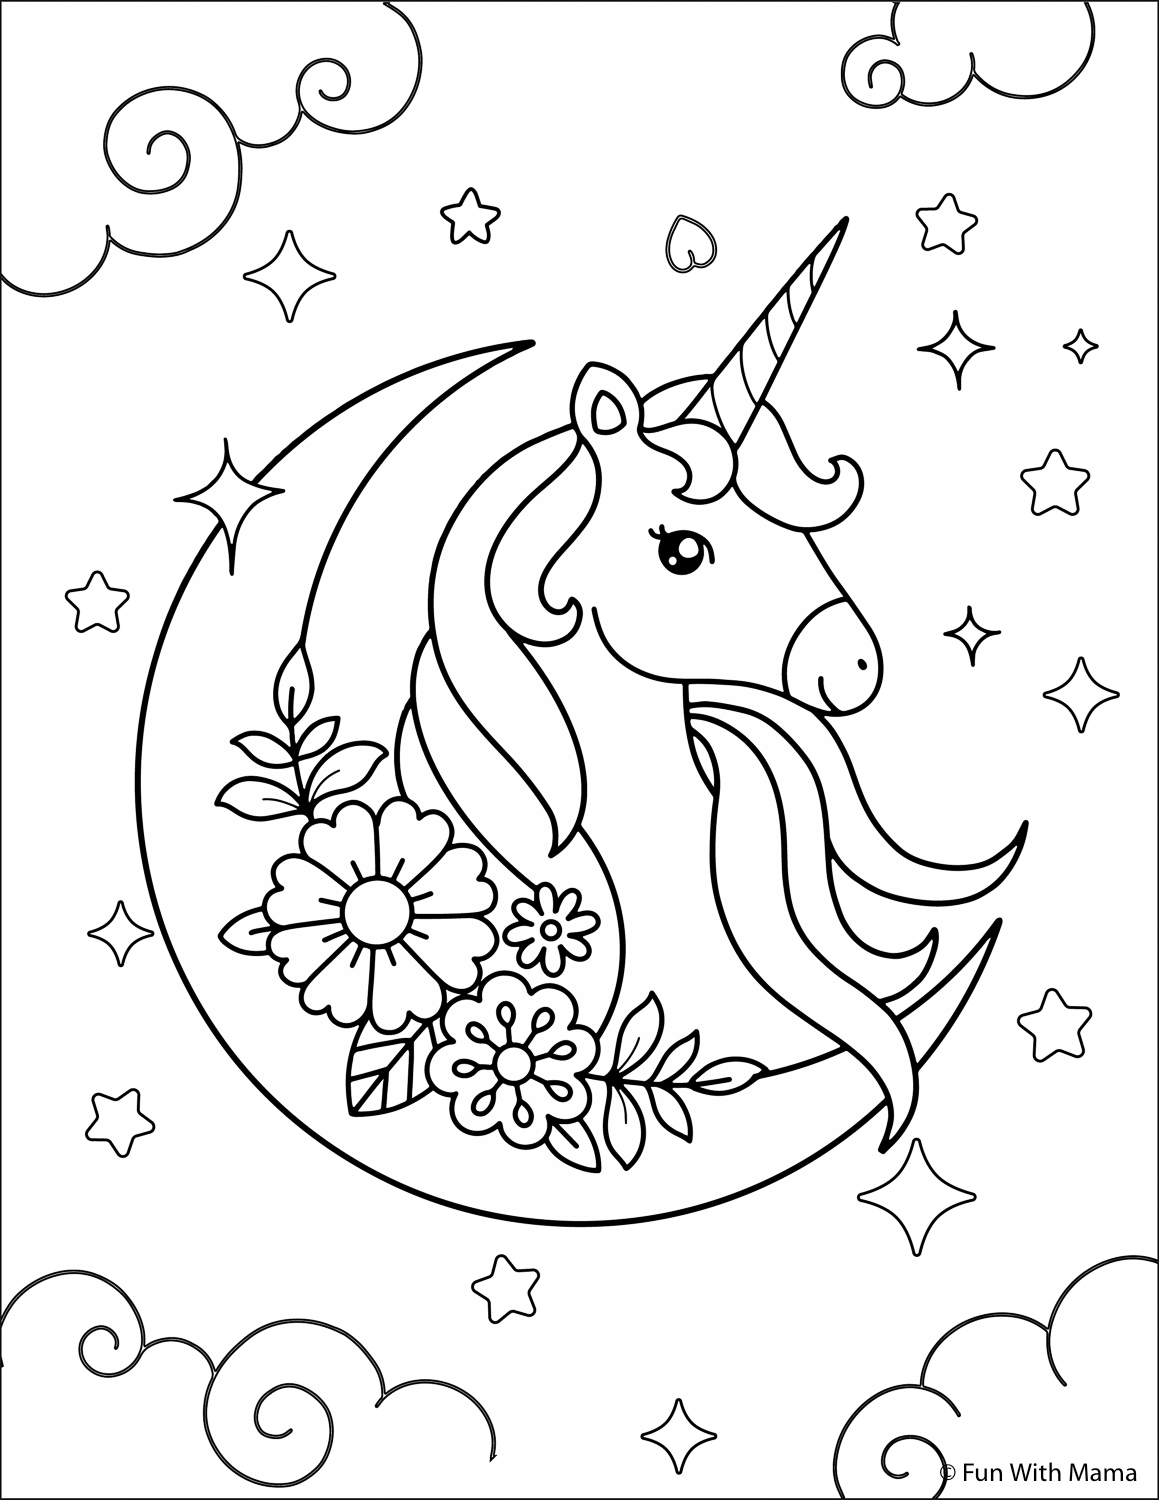 Unicorn Coloring Page Picture On The Moon